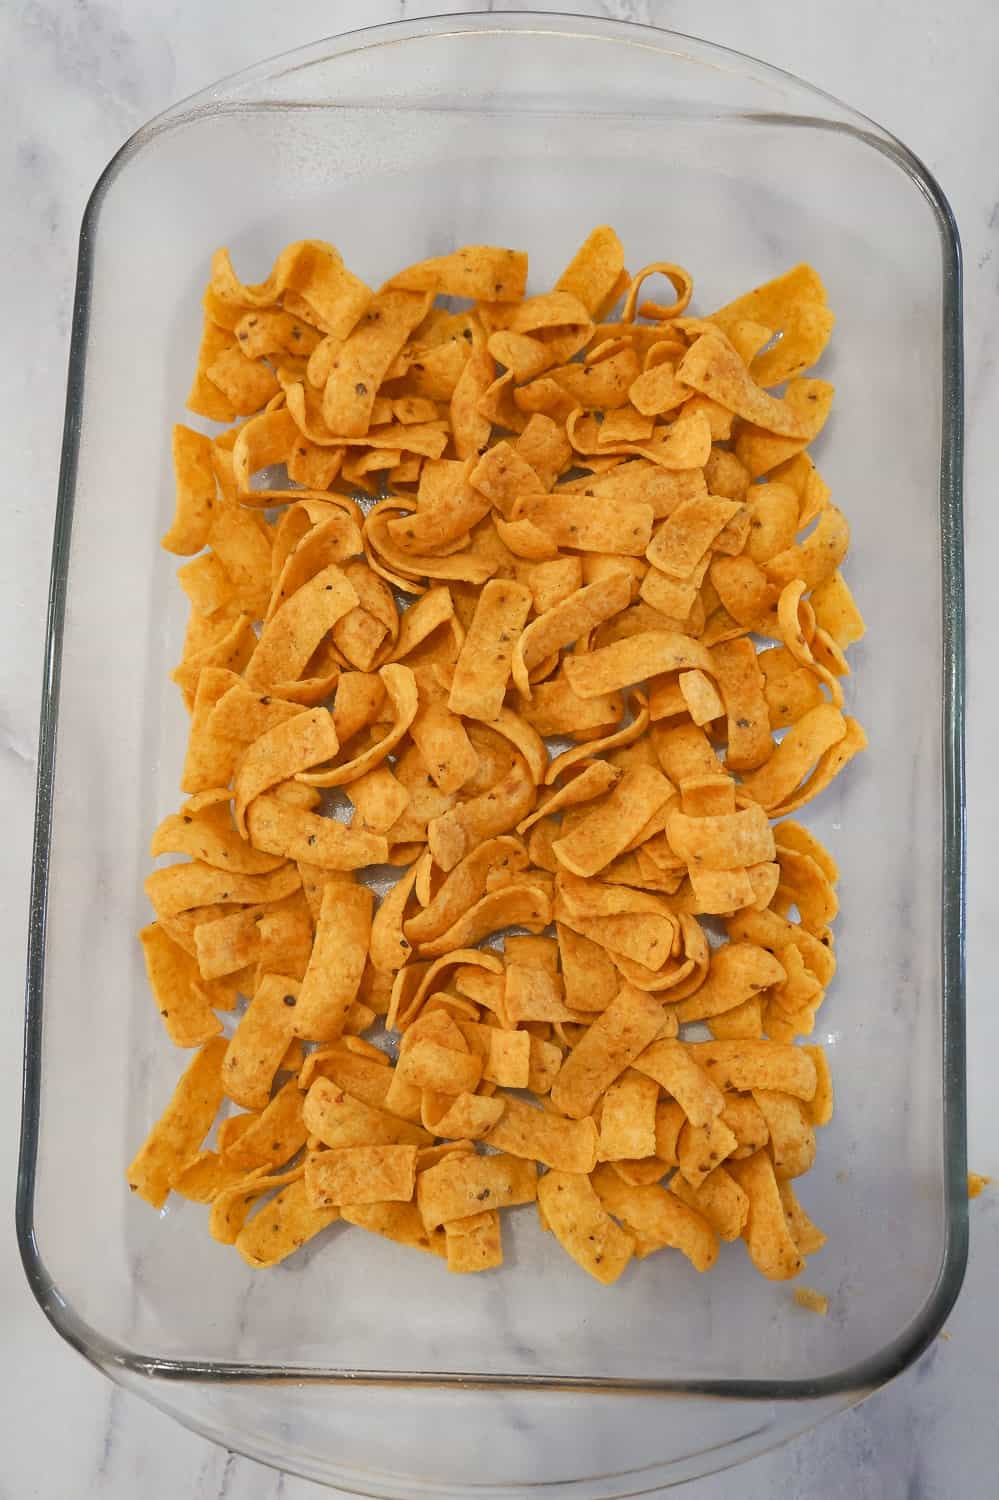 Frito's corn chips in the bottom of a baking dish